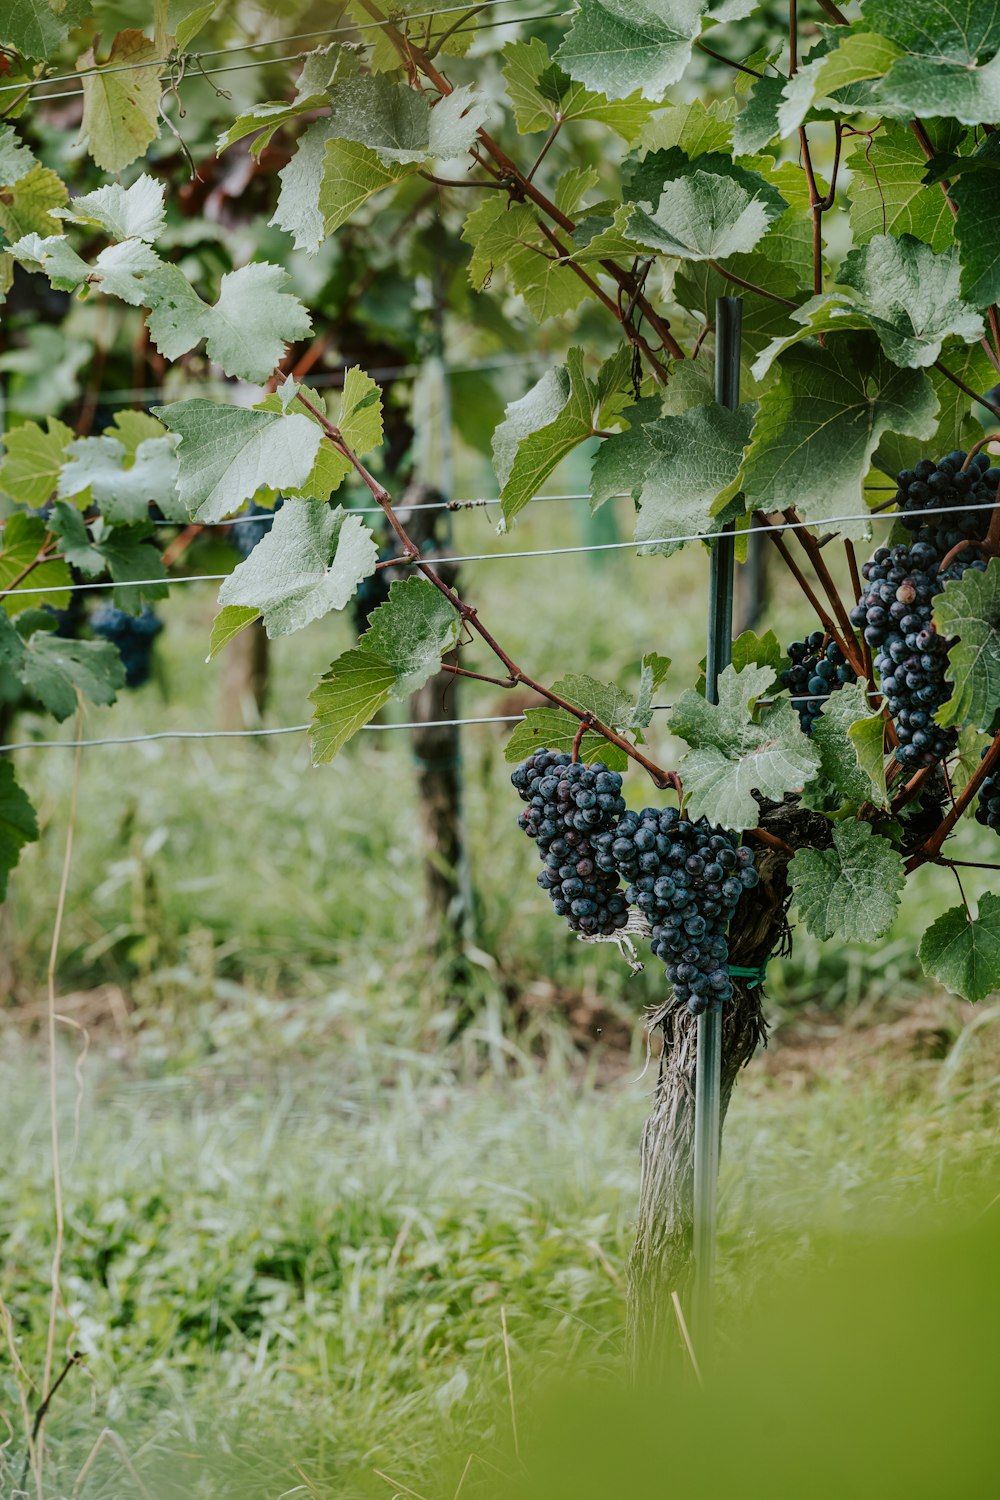 a close-up of grapes growing on a vine